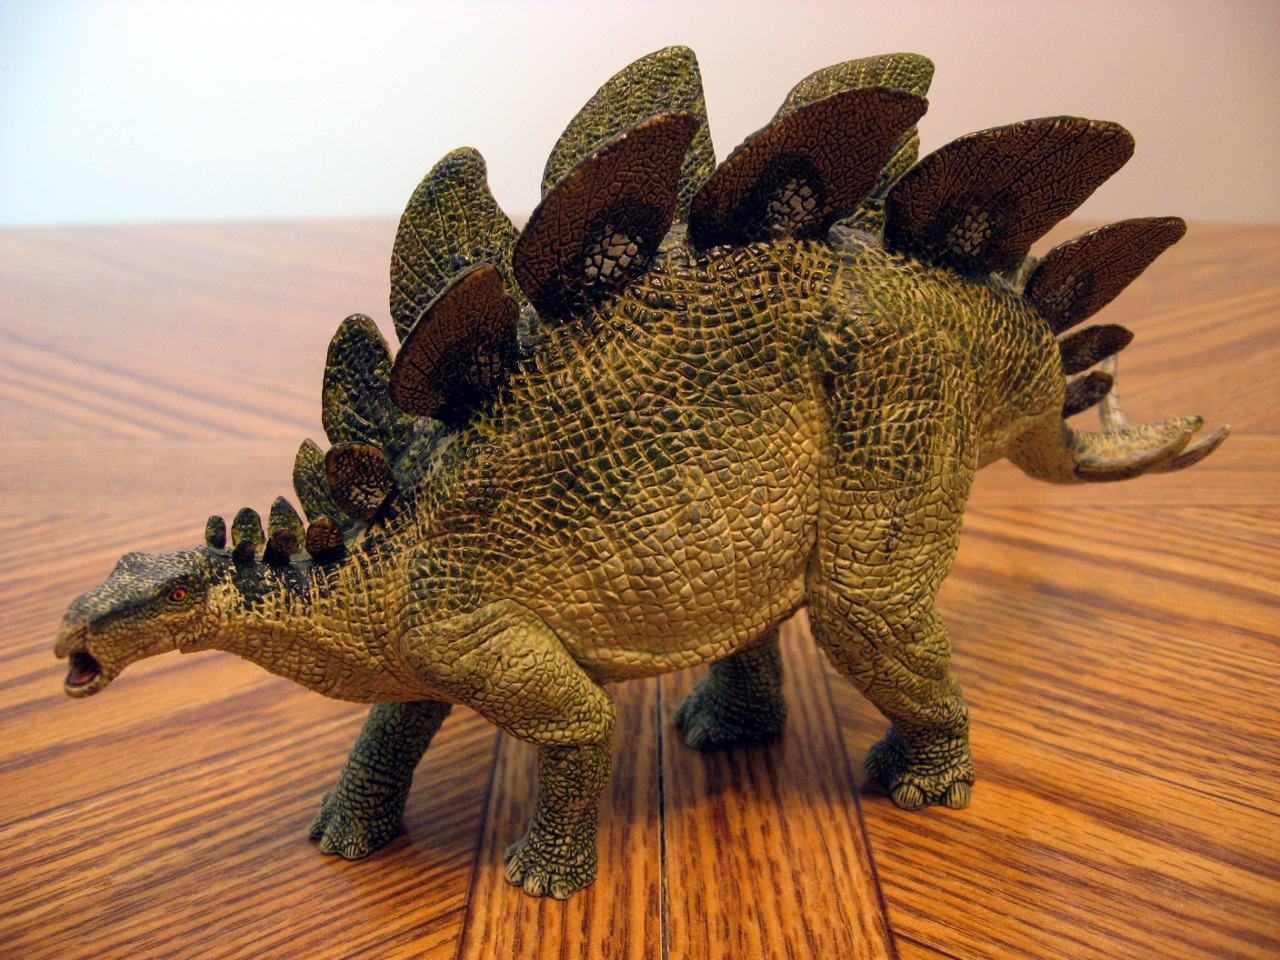 In the 1920s a paleontology writer suggested that the back plates of Stegosaurus were wings that were used by the dinosaur to glide.